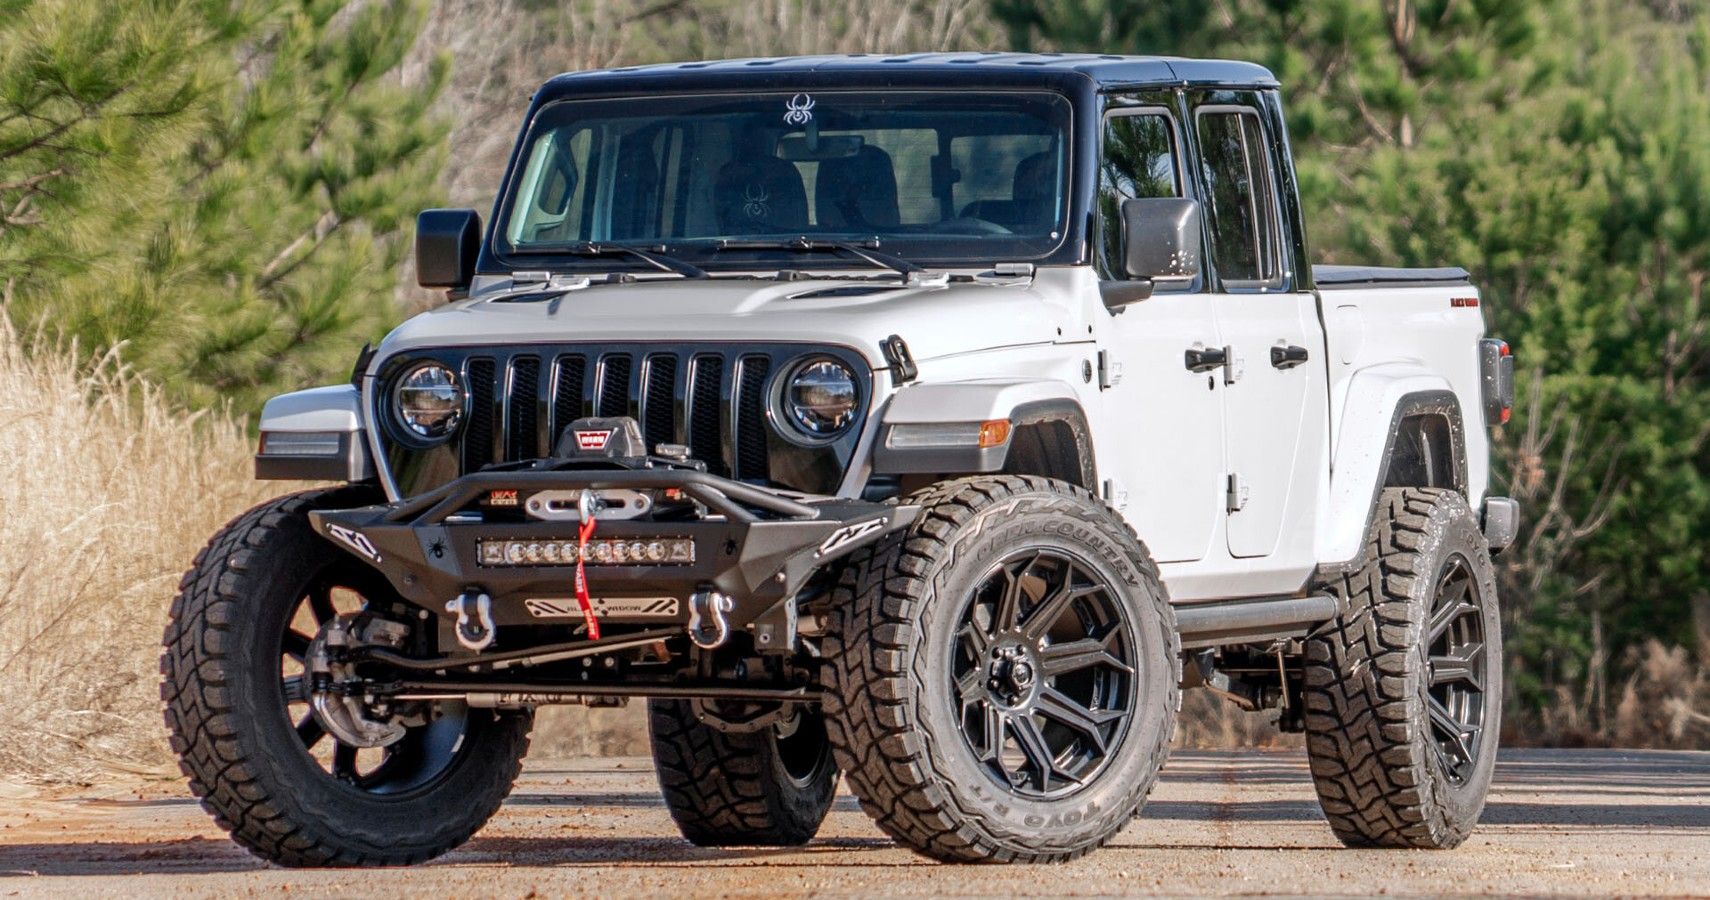 Check Out The 2021 Jeep Gladiator Black Widow Edition